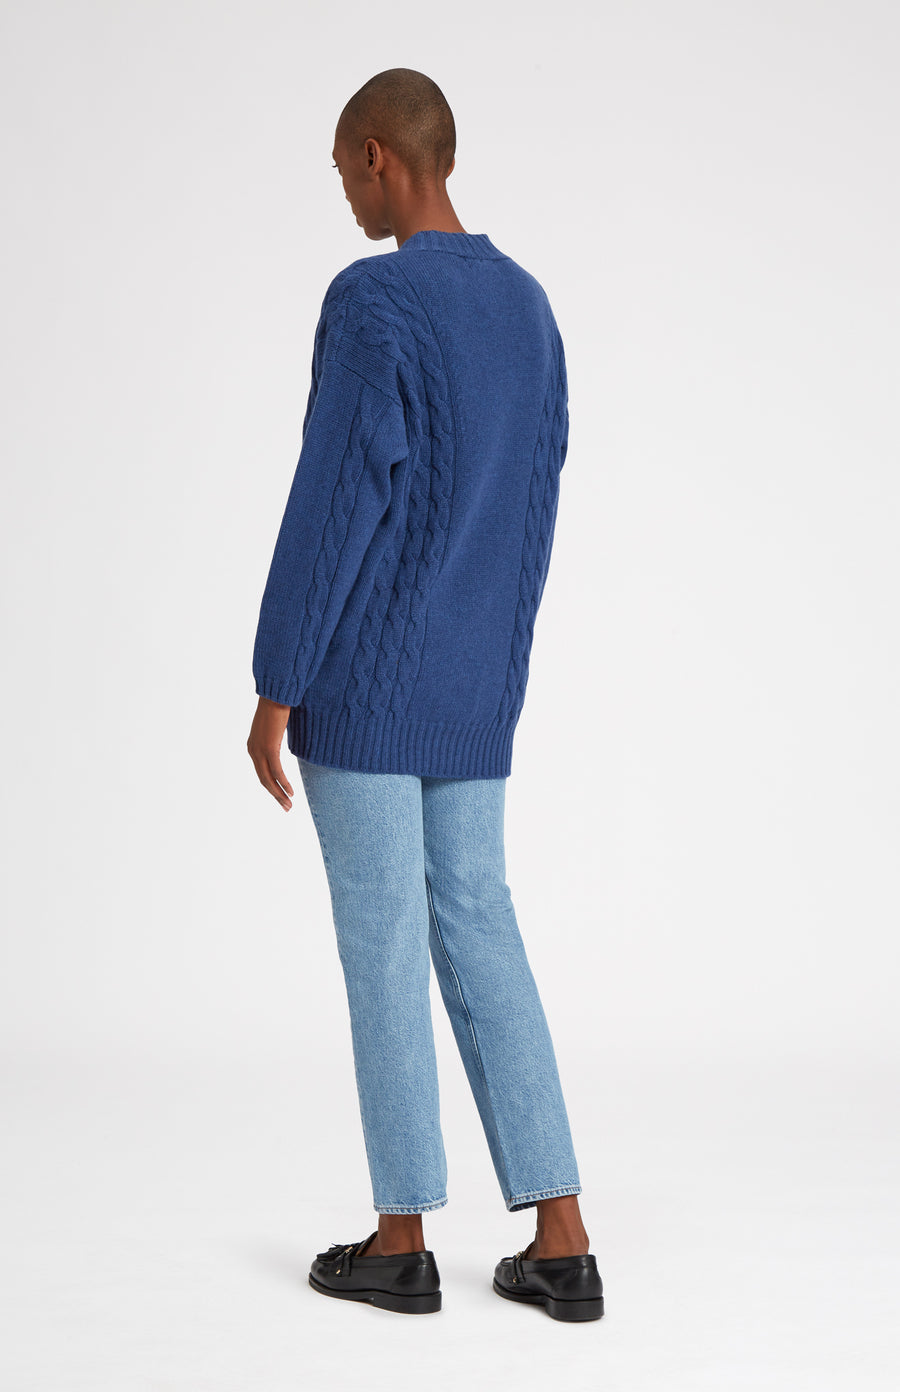 Superfine Wool Cardigan with Cable detail in Storm Blue rear view - Pringle of Scotland